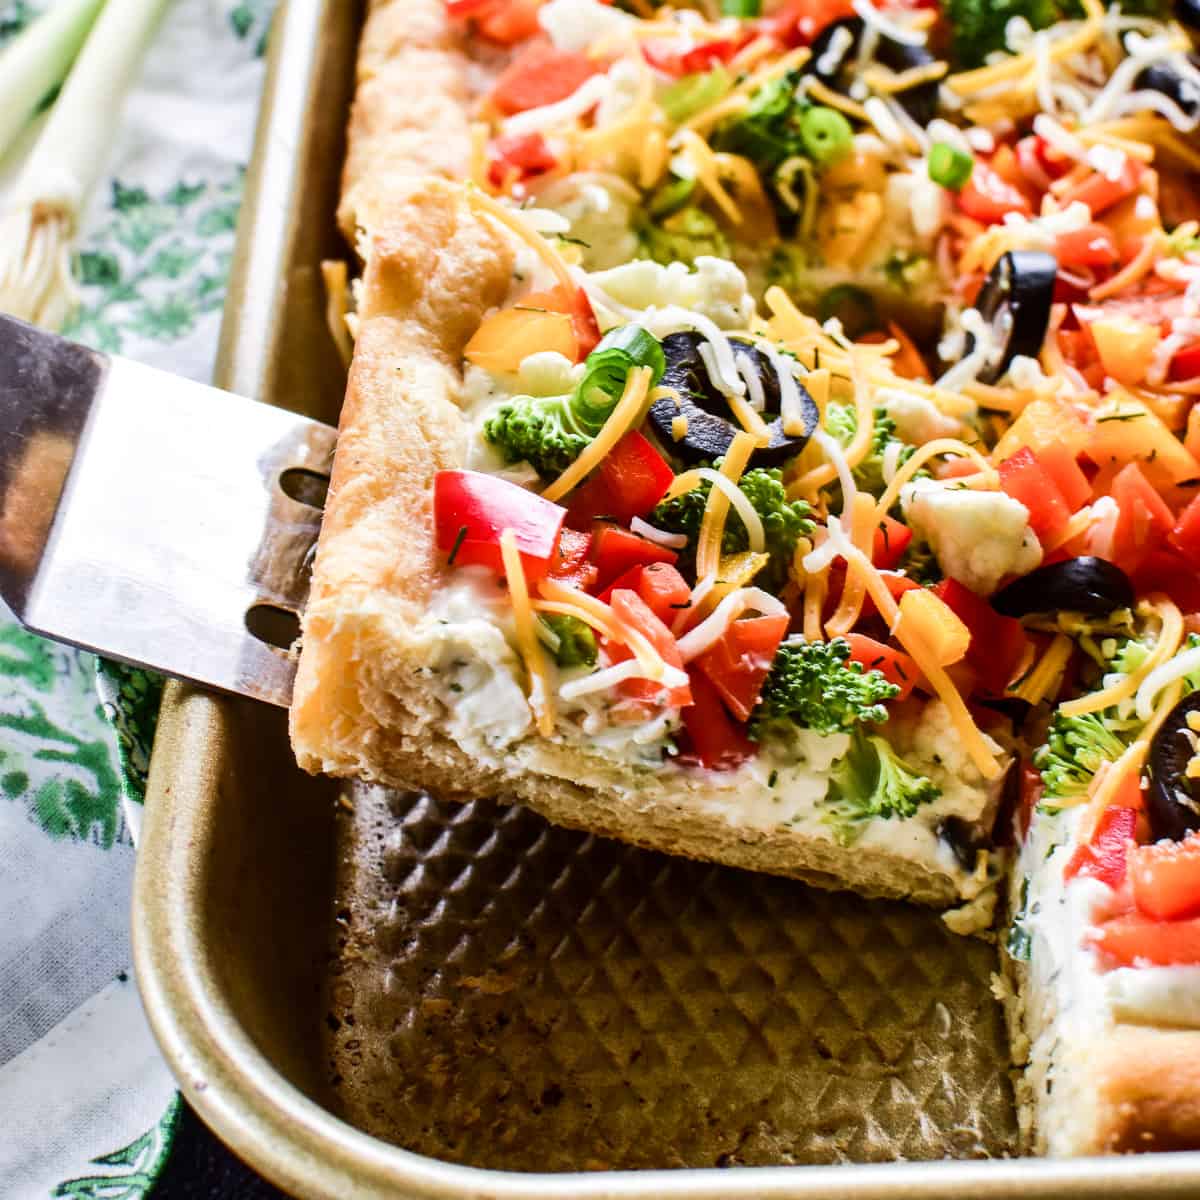 Crescent Roll Pizza - THIS IS NOT DIET FOOD